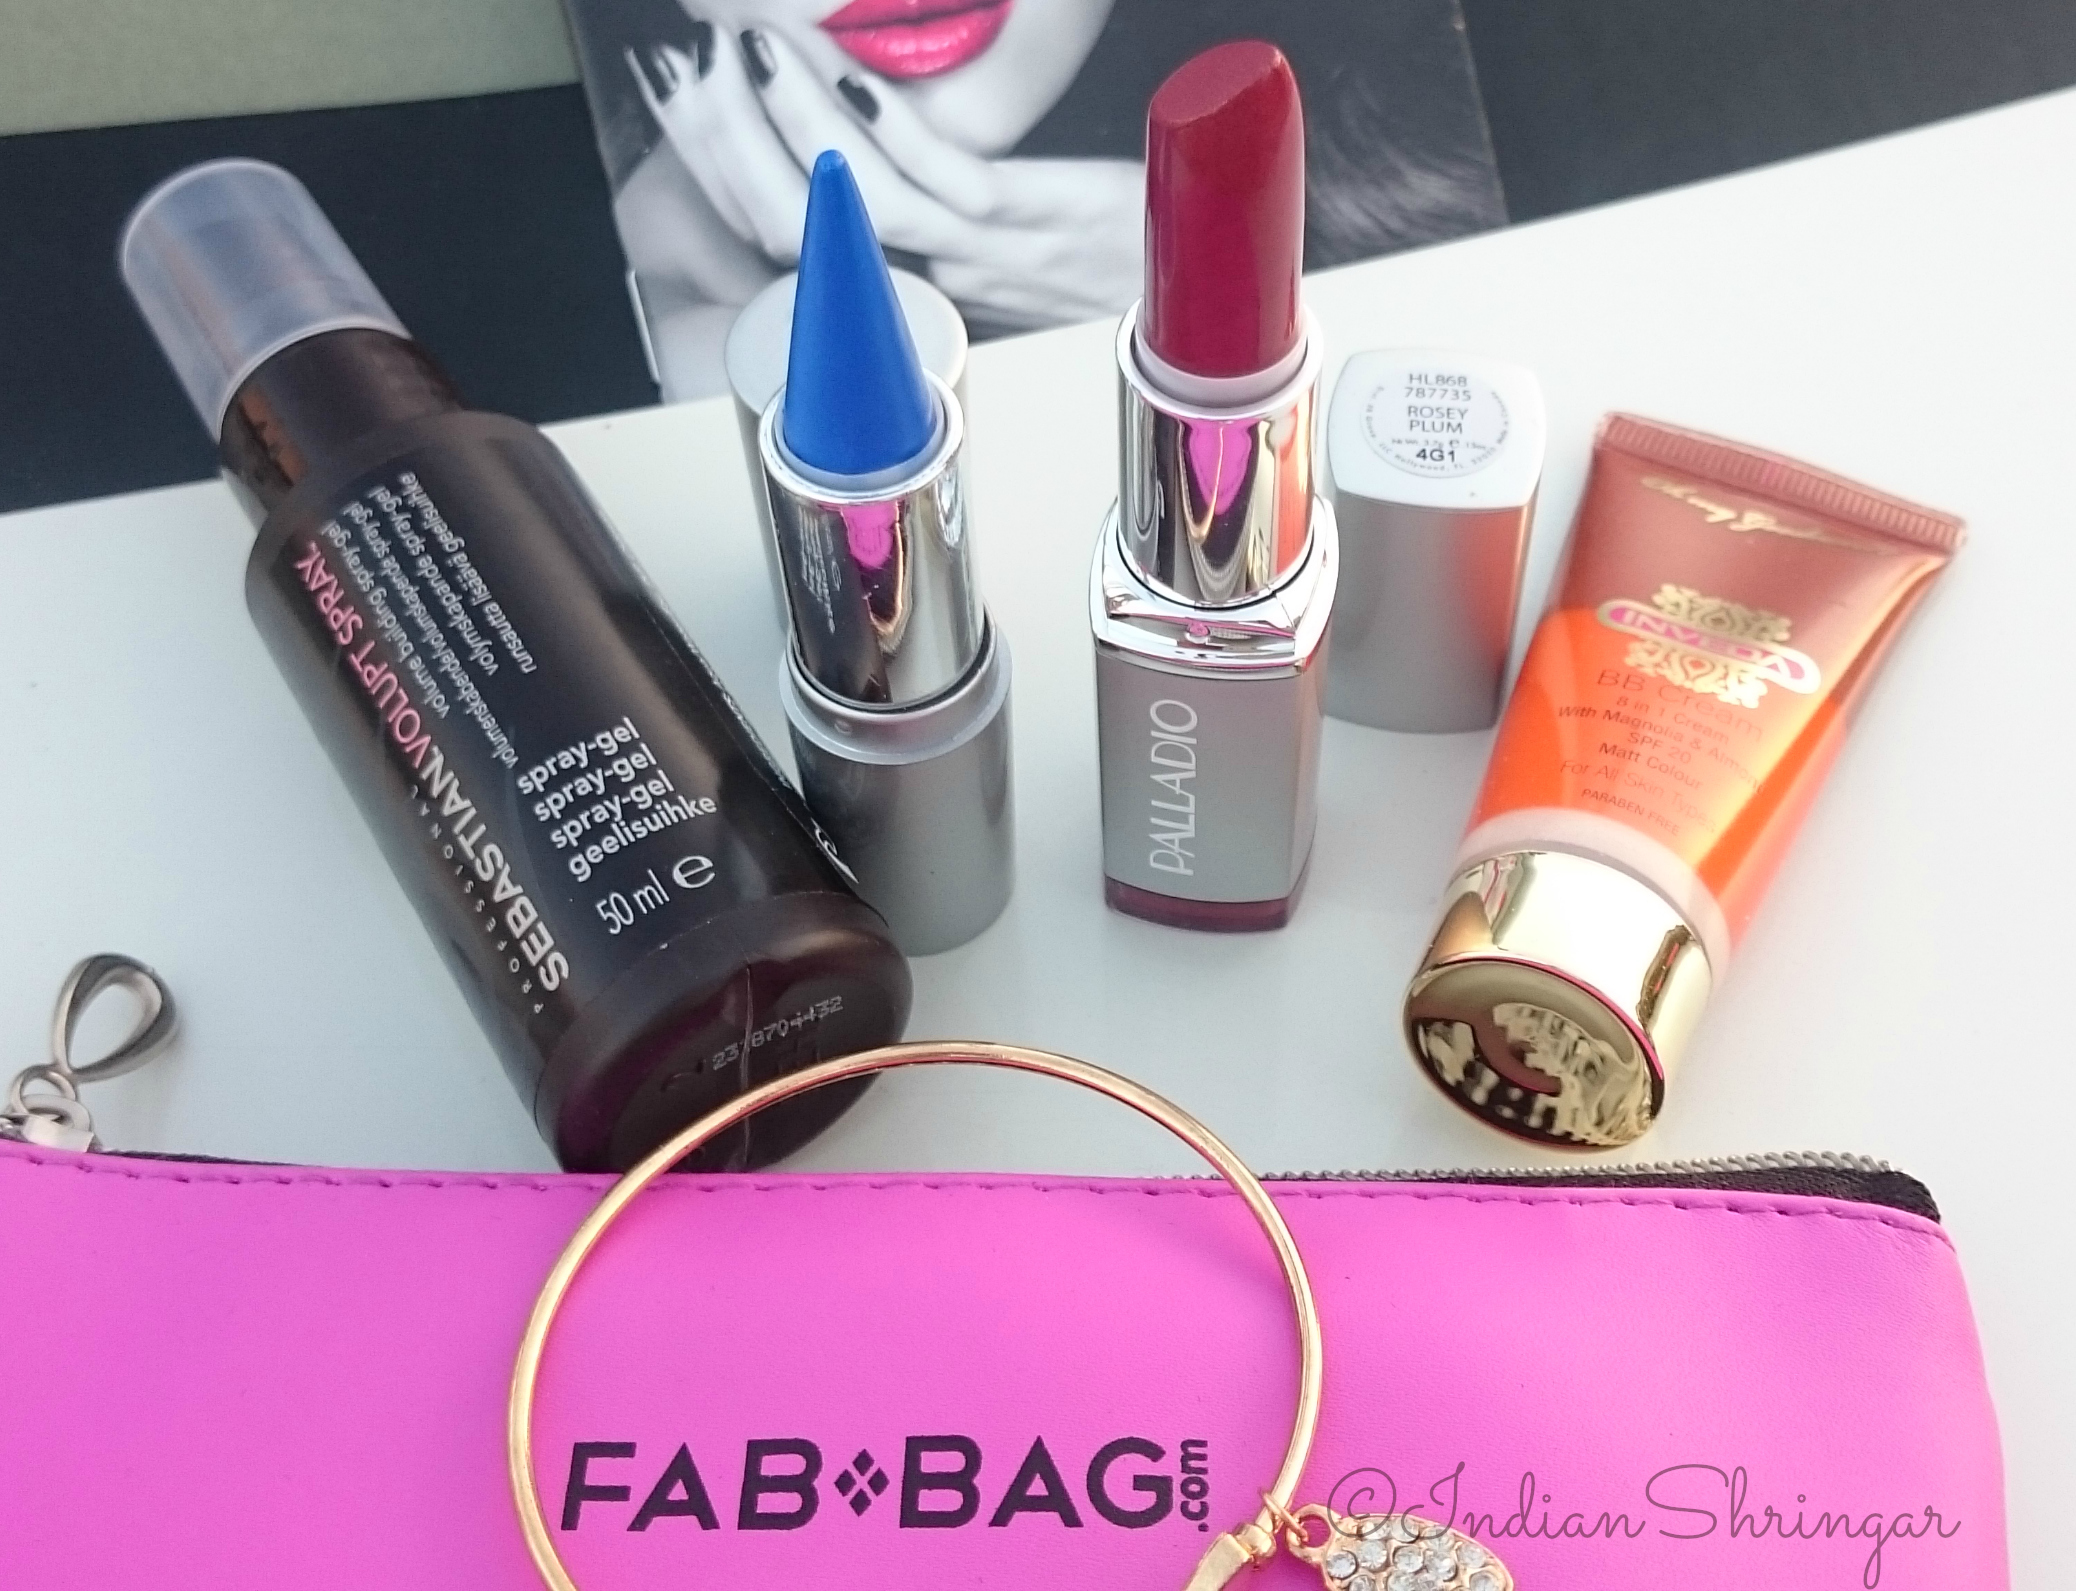 Contents of Fabbag March 2015